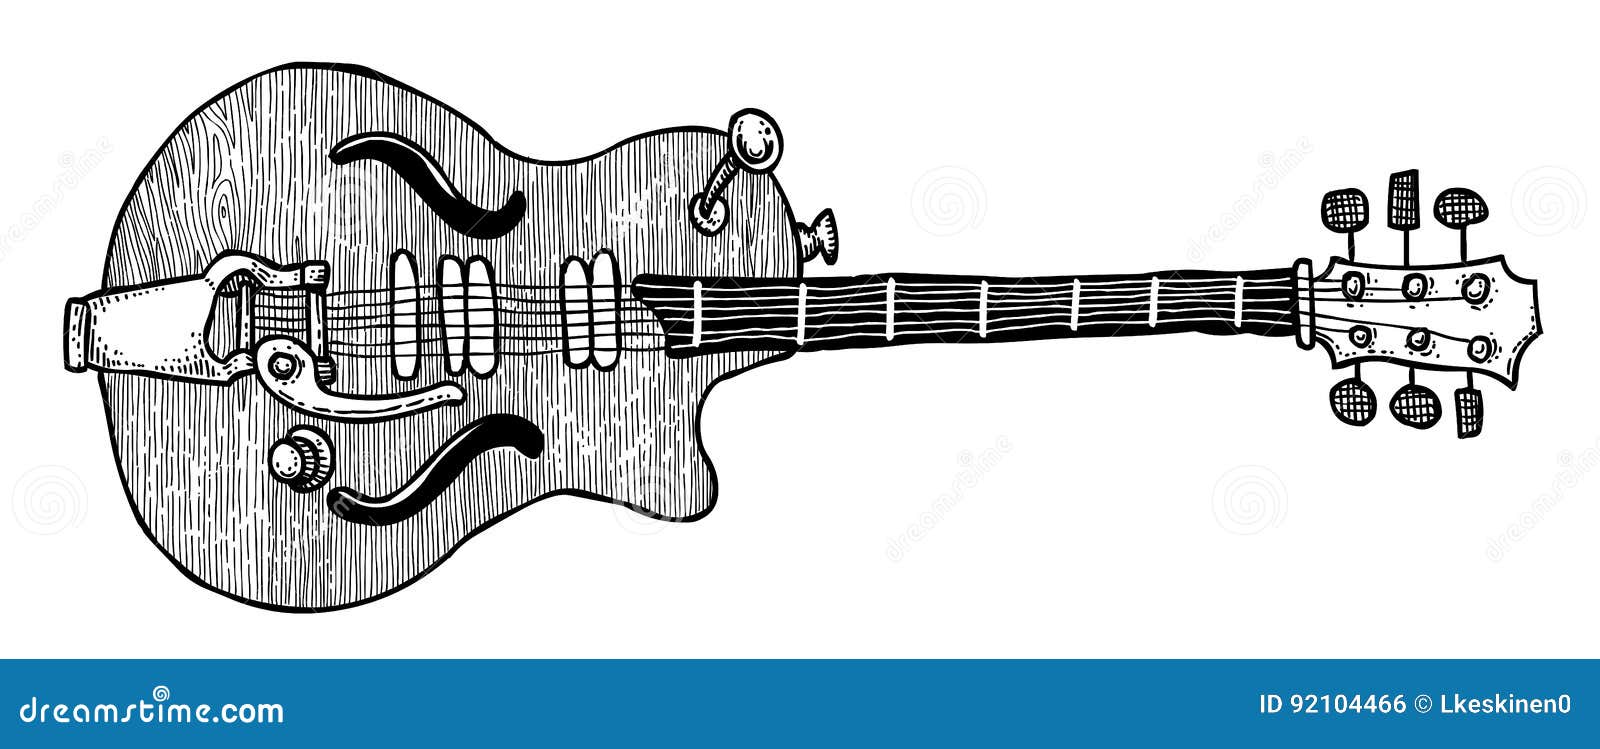 Cartoon image of electric guitar. An artistic freehand picture.